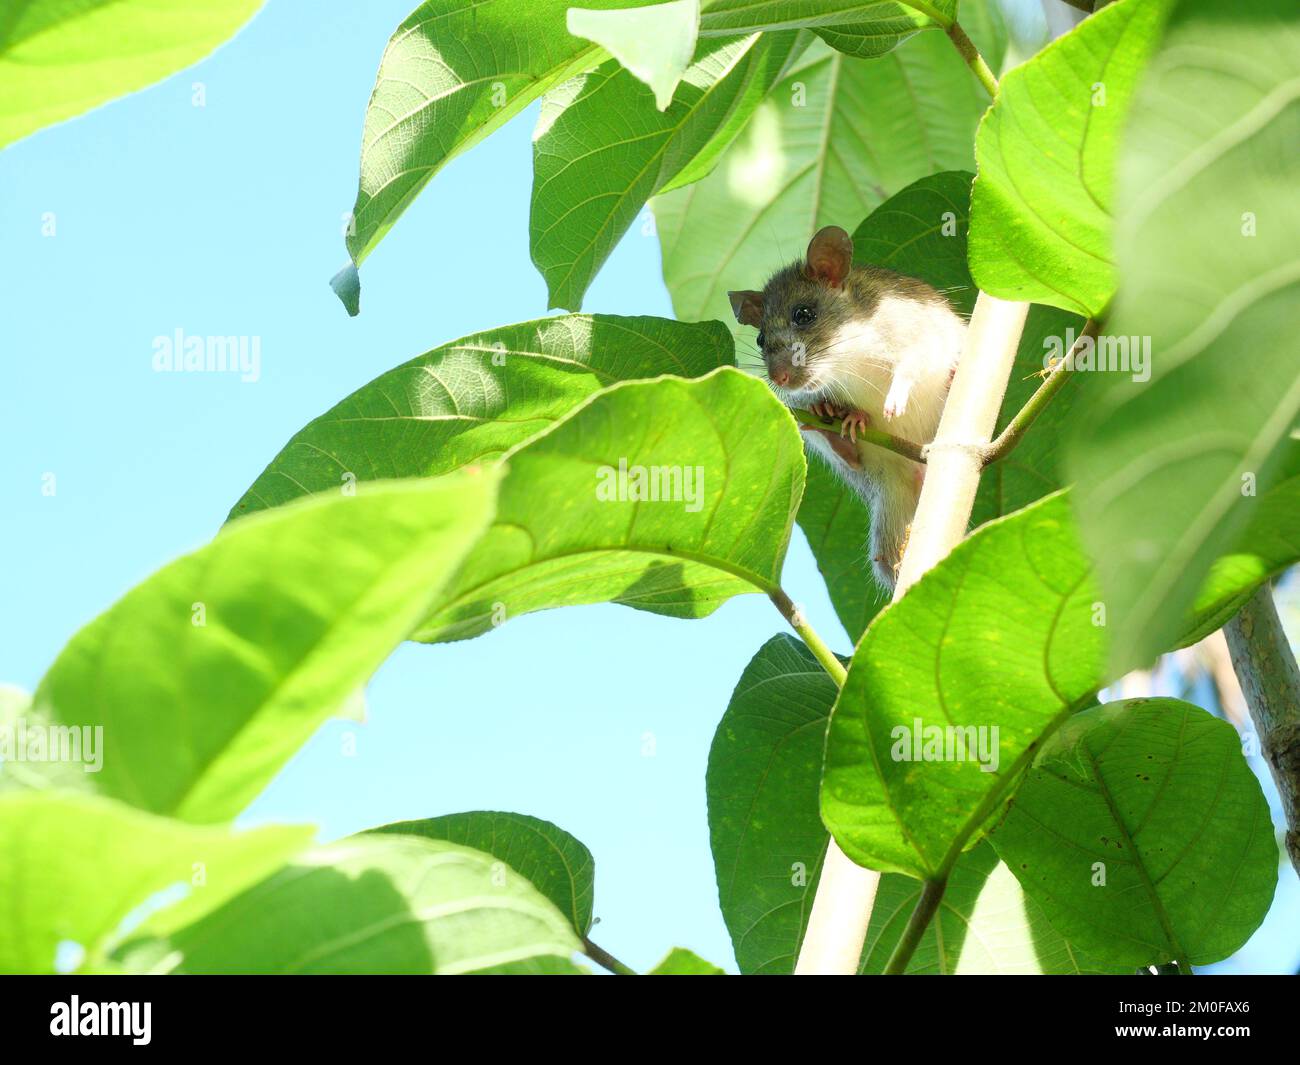 Rat on tree, Hiding of mice , Rodent in the bush, Close-up mouse with green leave and blue sky in background Stock Photo